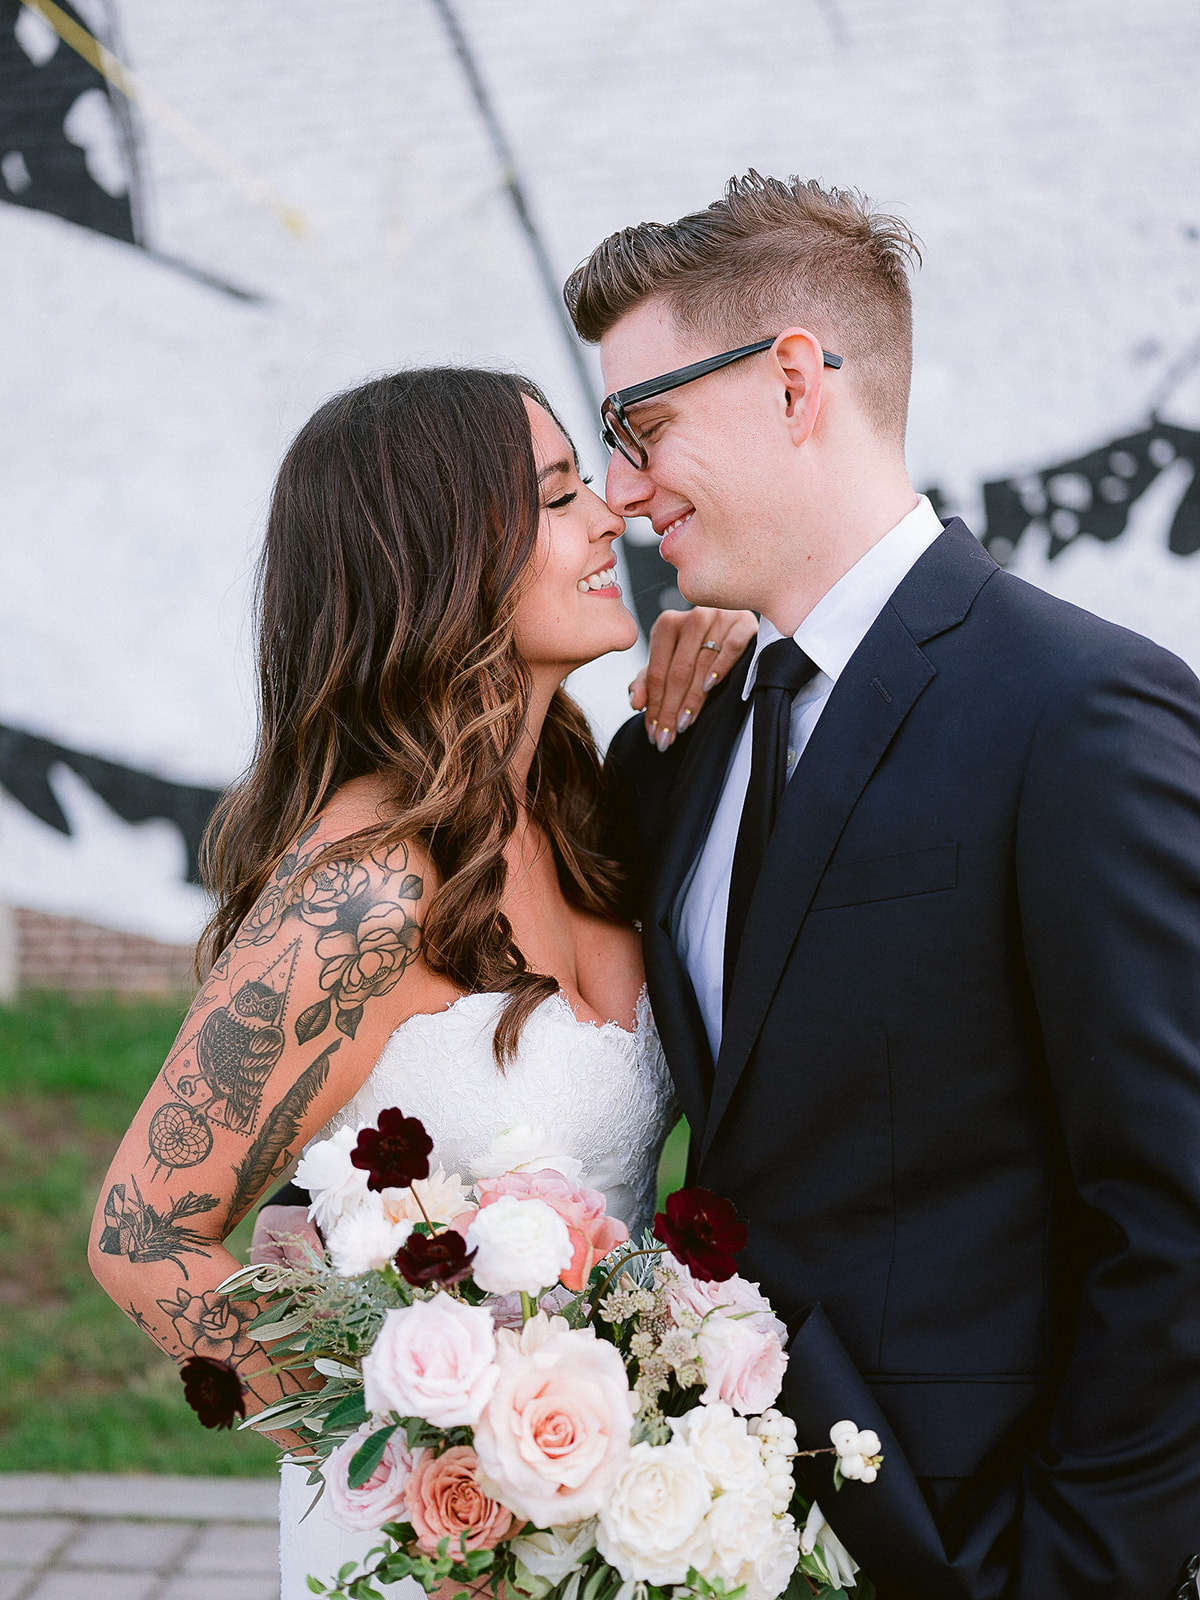 A bride and groom photo at Greenpoint Loft in Brooklyn, NY